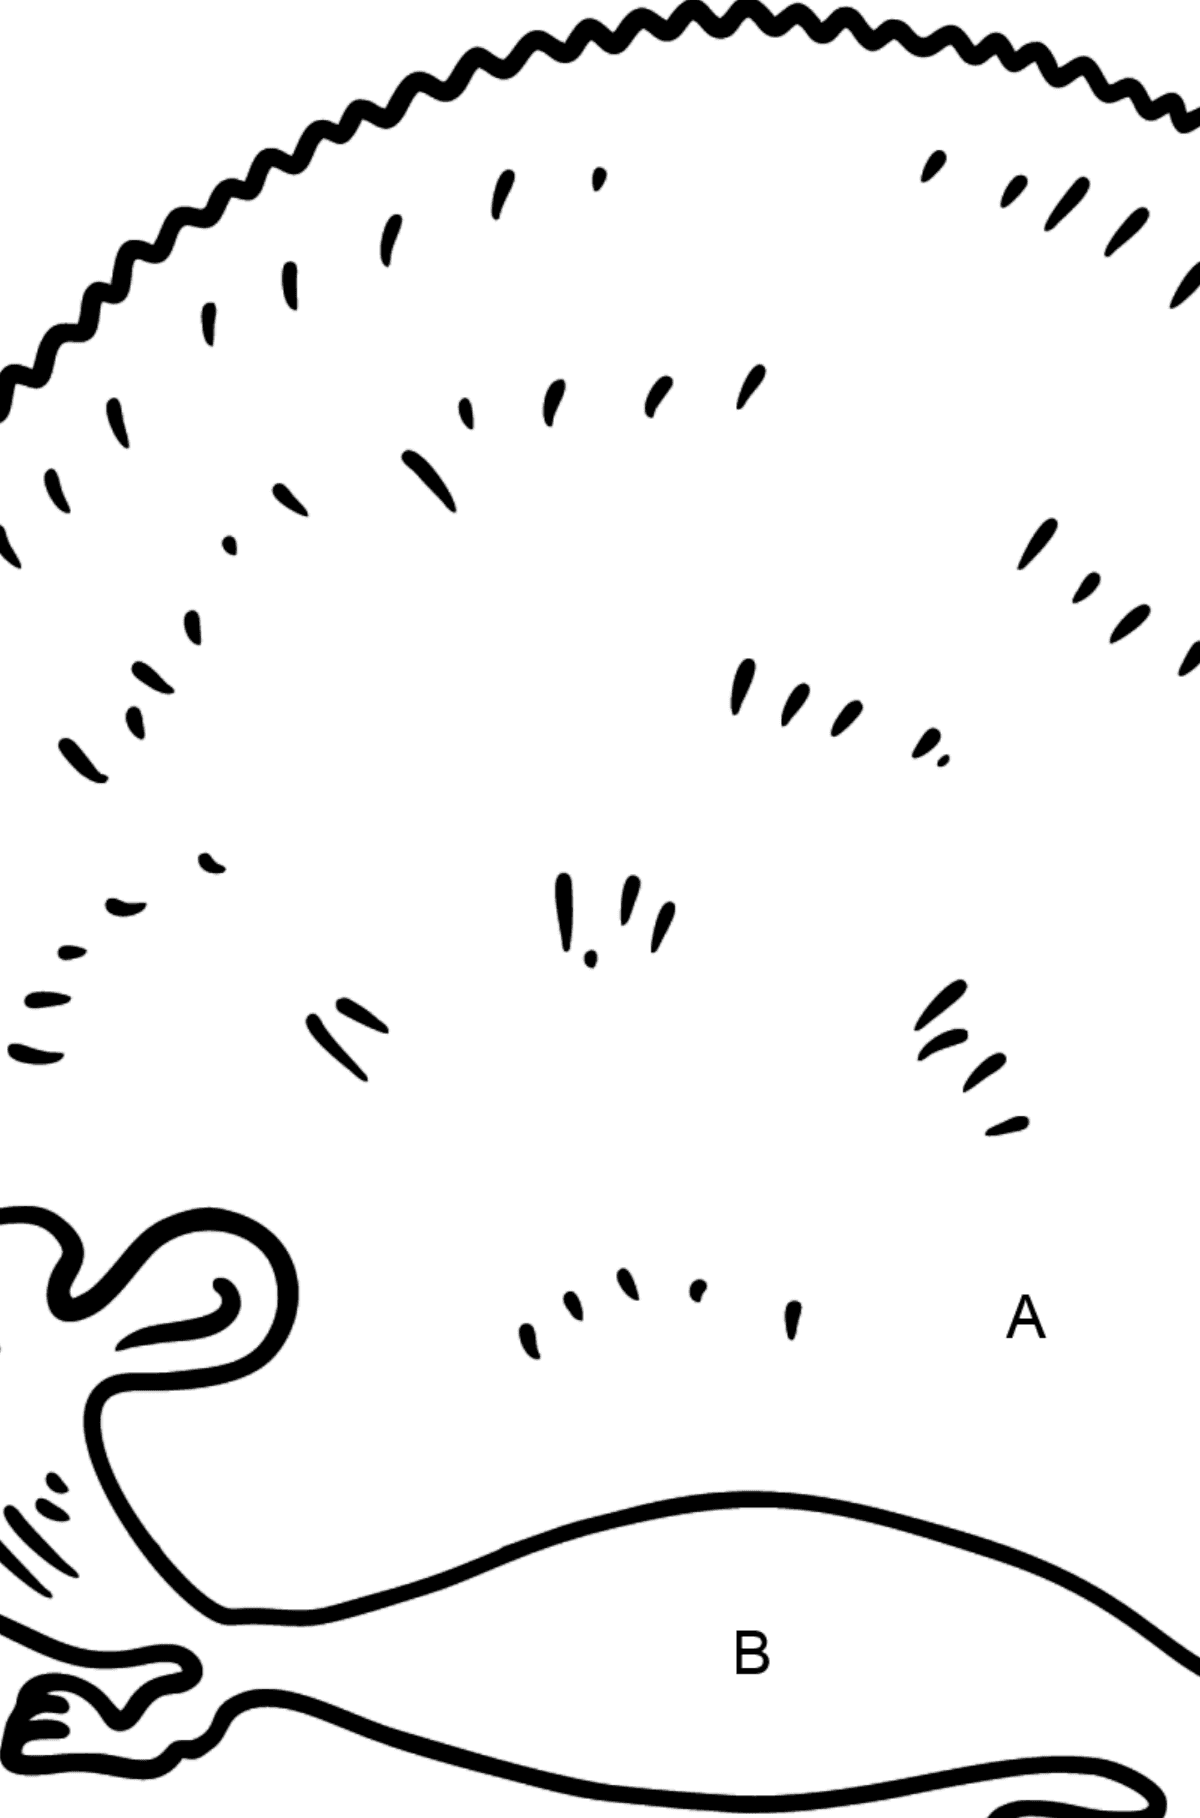 Hedgehog coloring page - Coloring by Letters for Kids